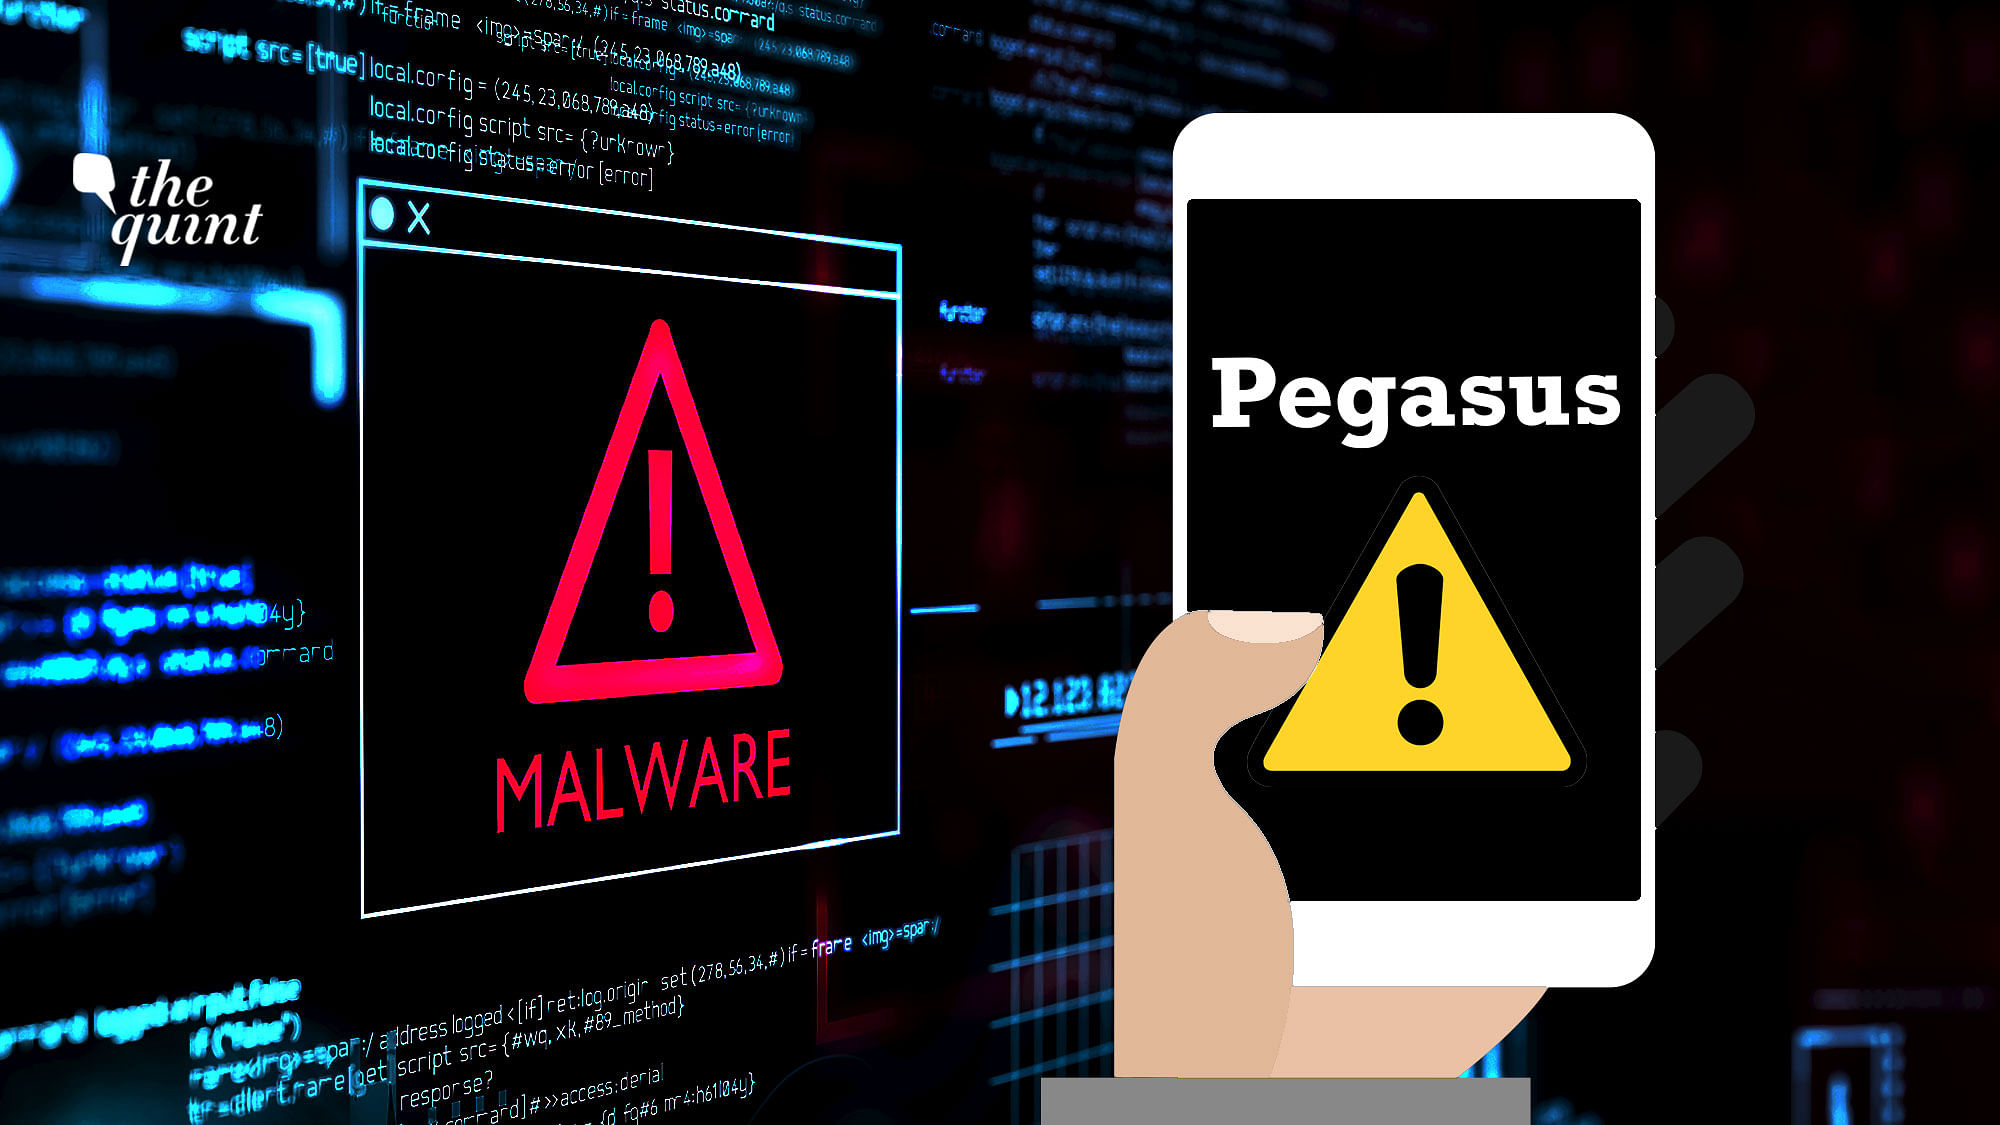 Pegasus spyware affects both Android and iOS devices.